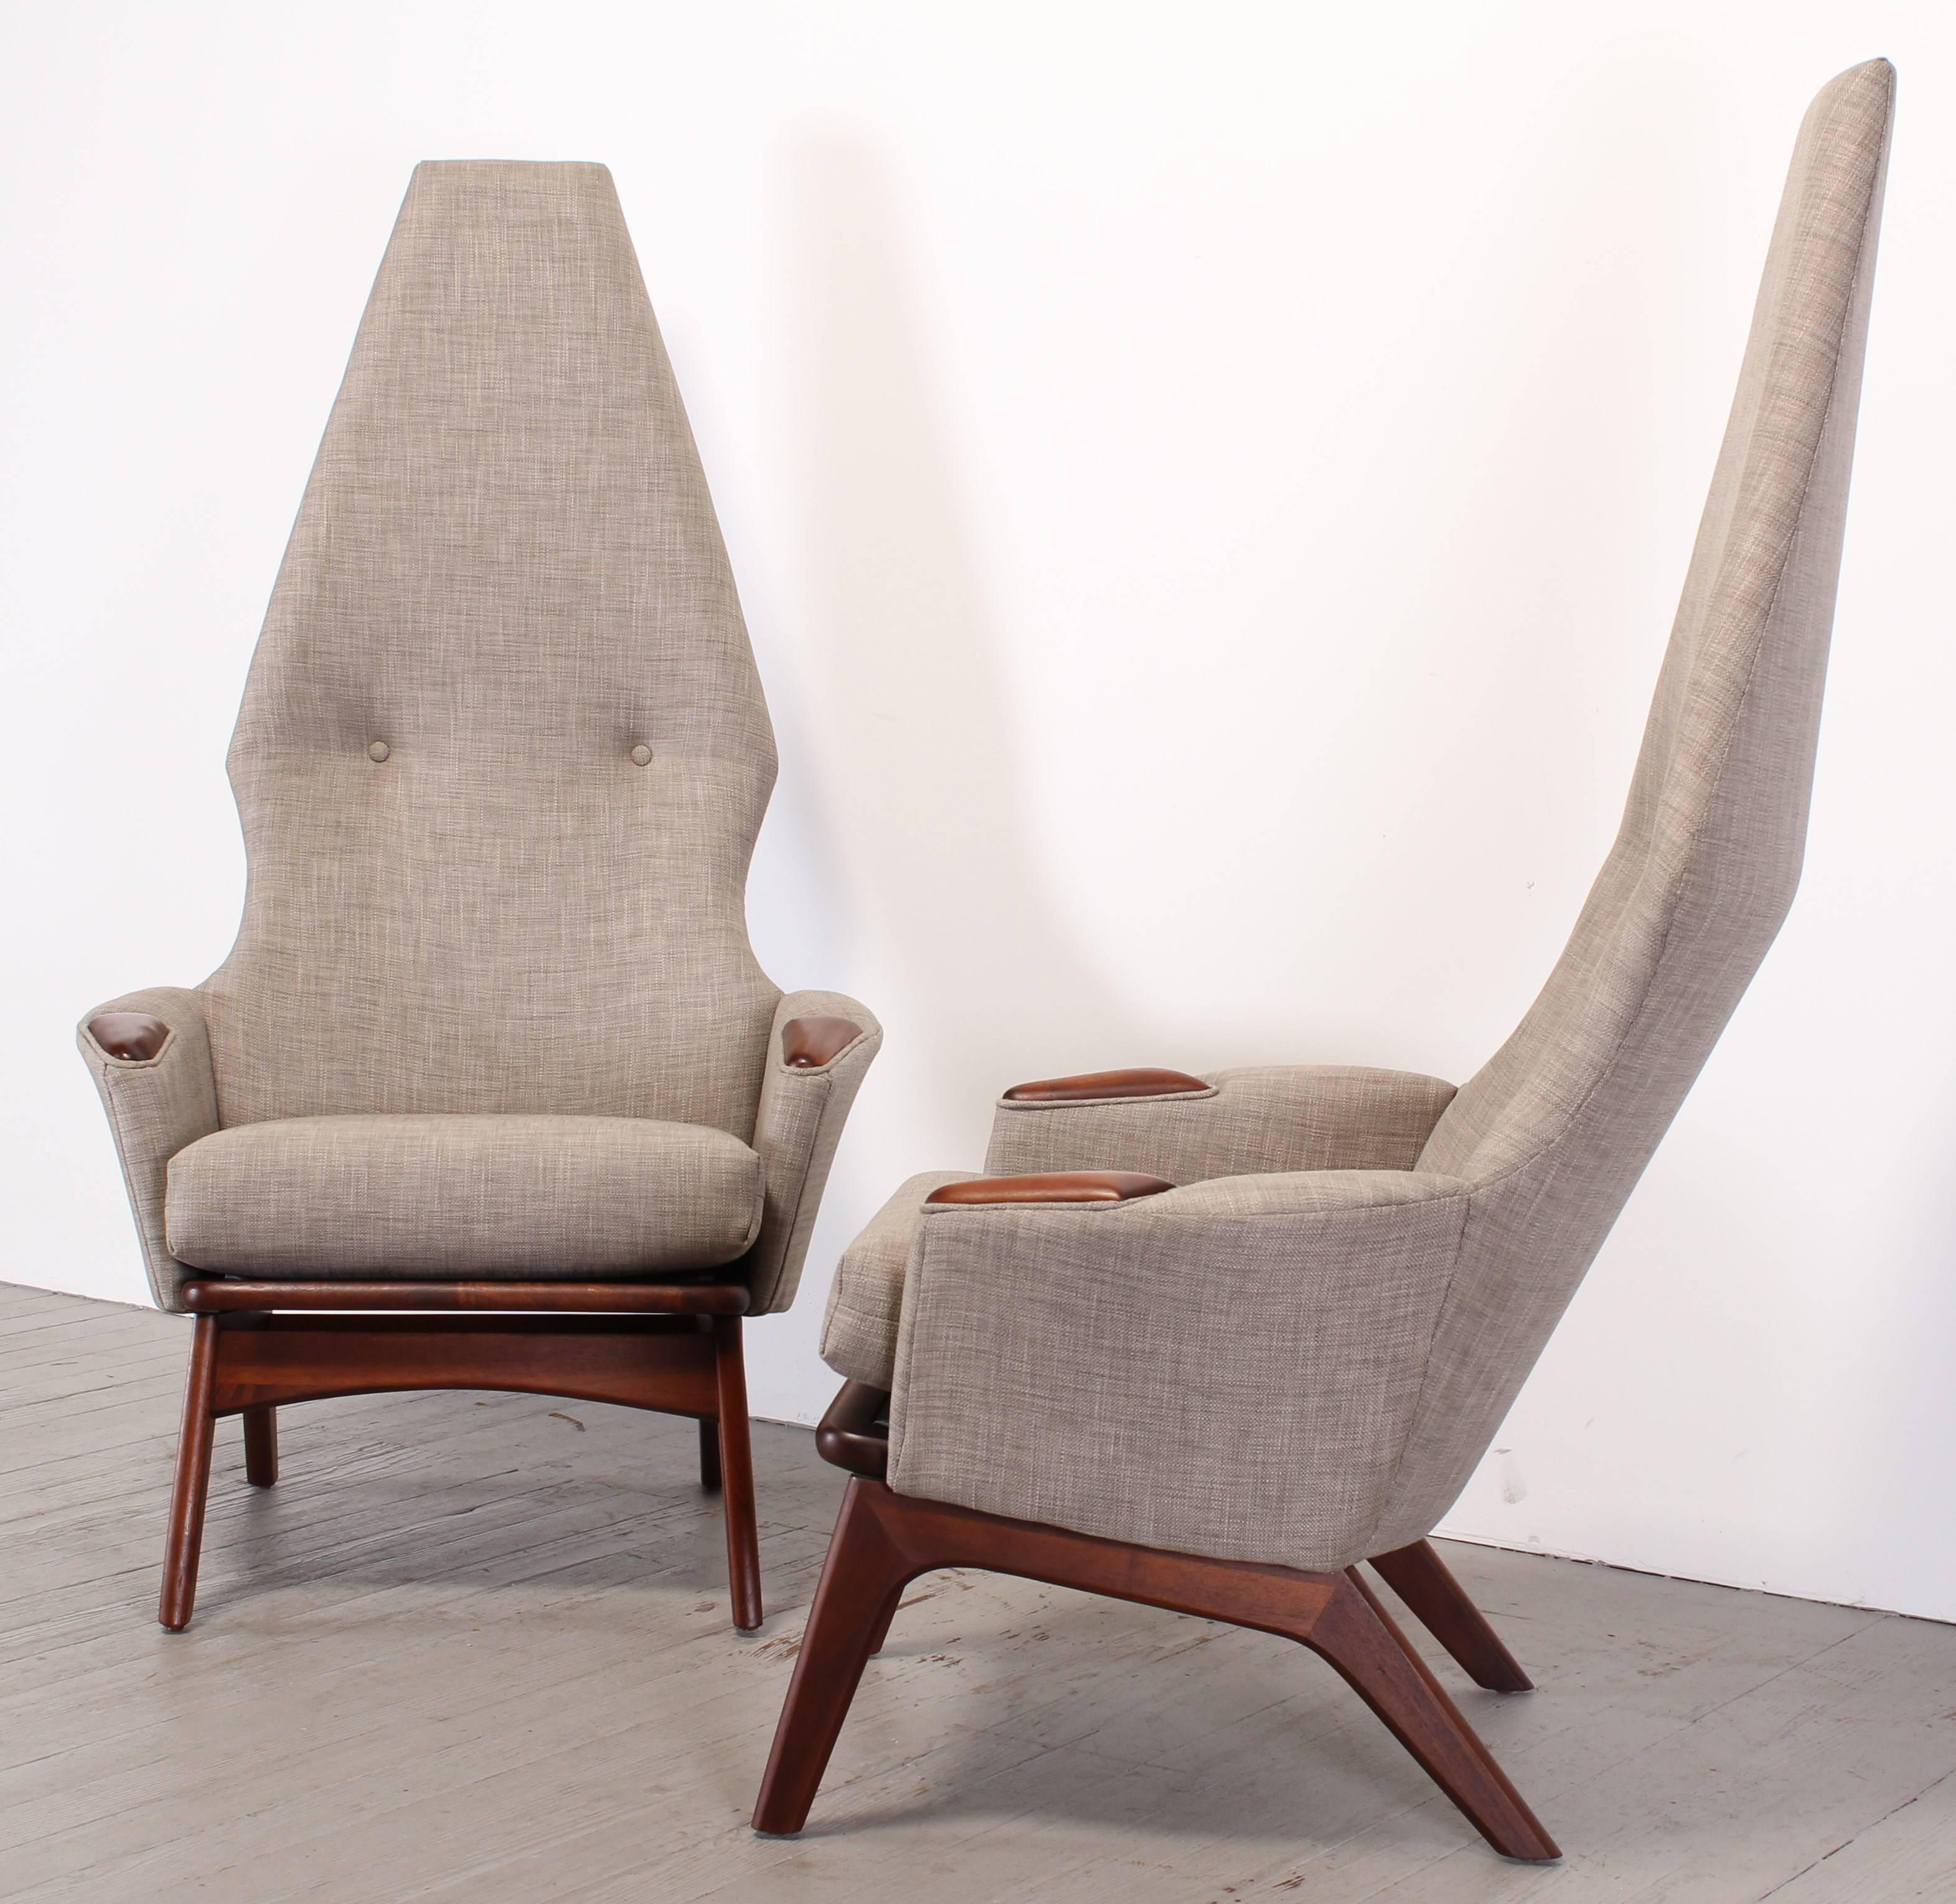 Mid-Century Modern Adrian Pearsall Pair of Walnut Chairs for Craft Associates Model #2056-C, 1960